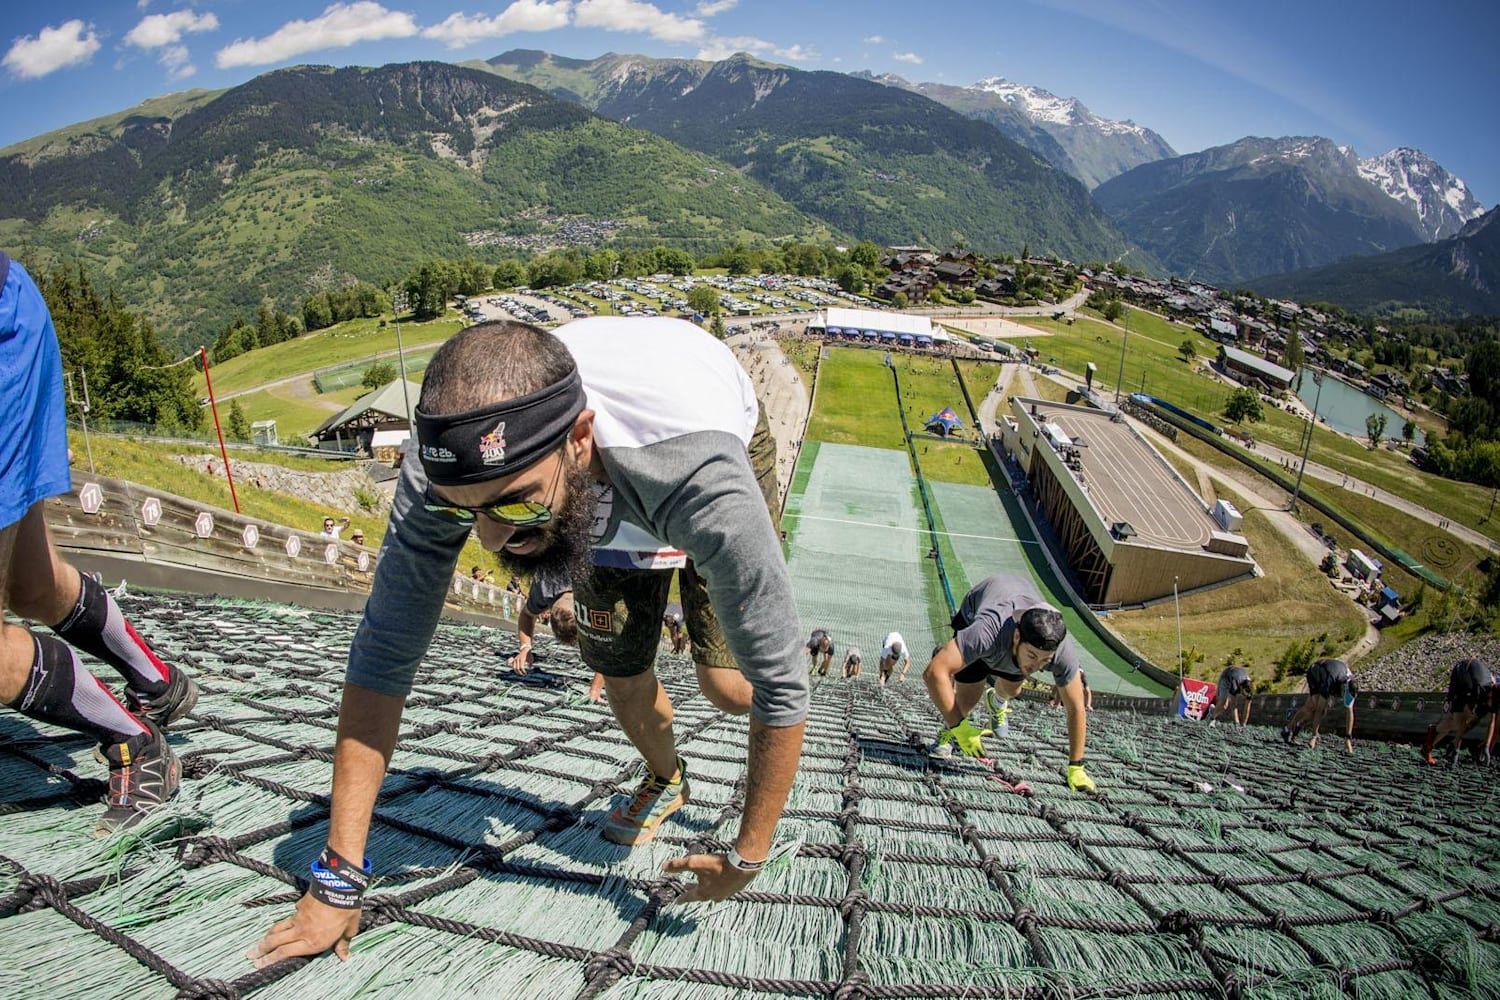 Red Bull 400 Courchevel, France official event info